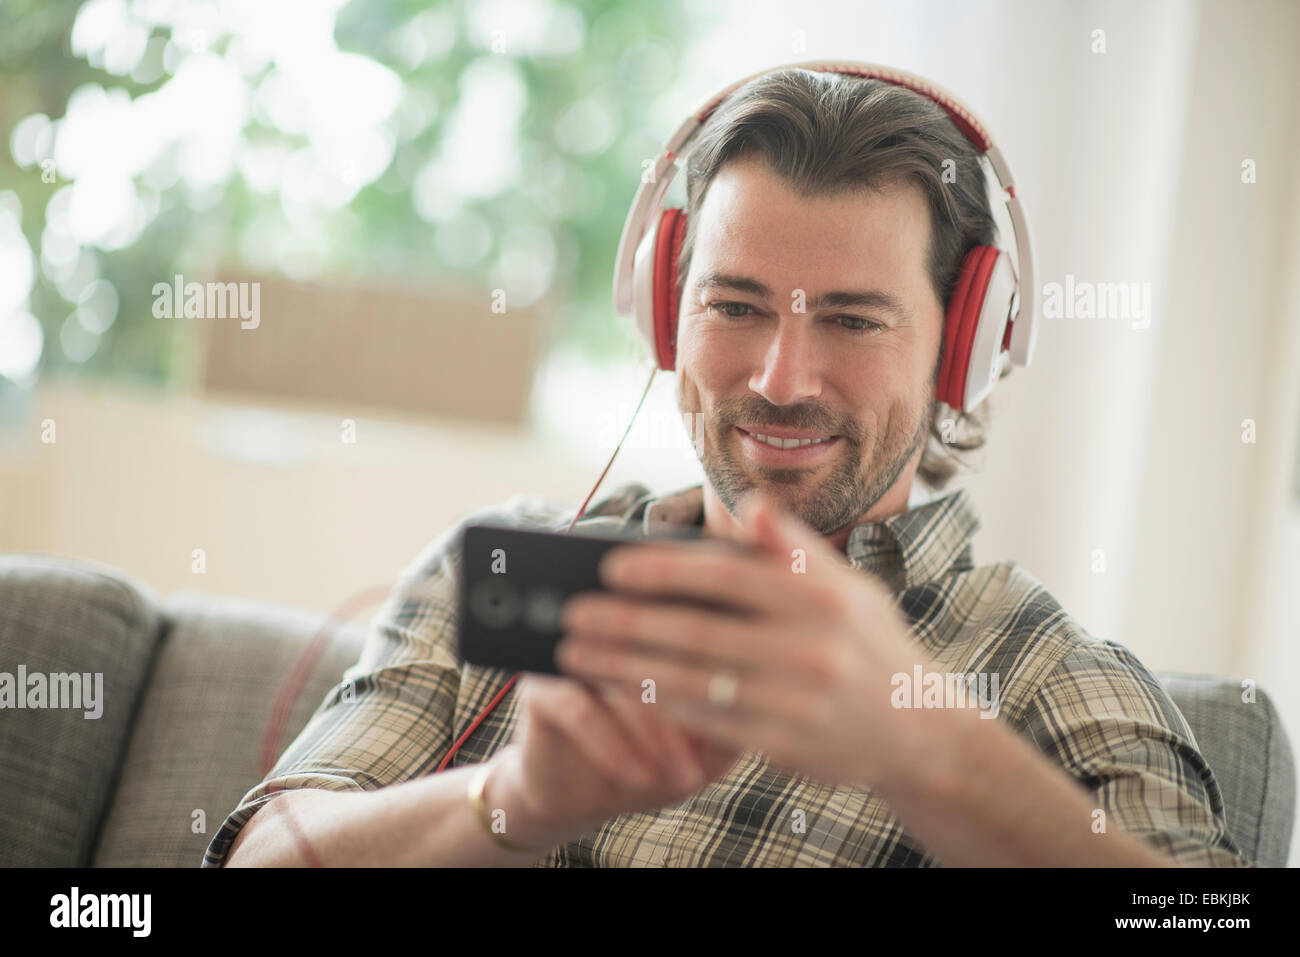 Smiling man listening to music Banque D'Images